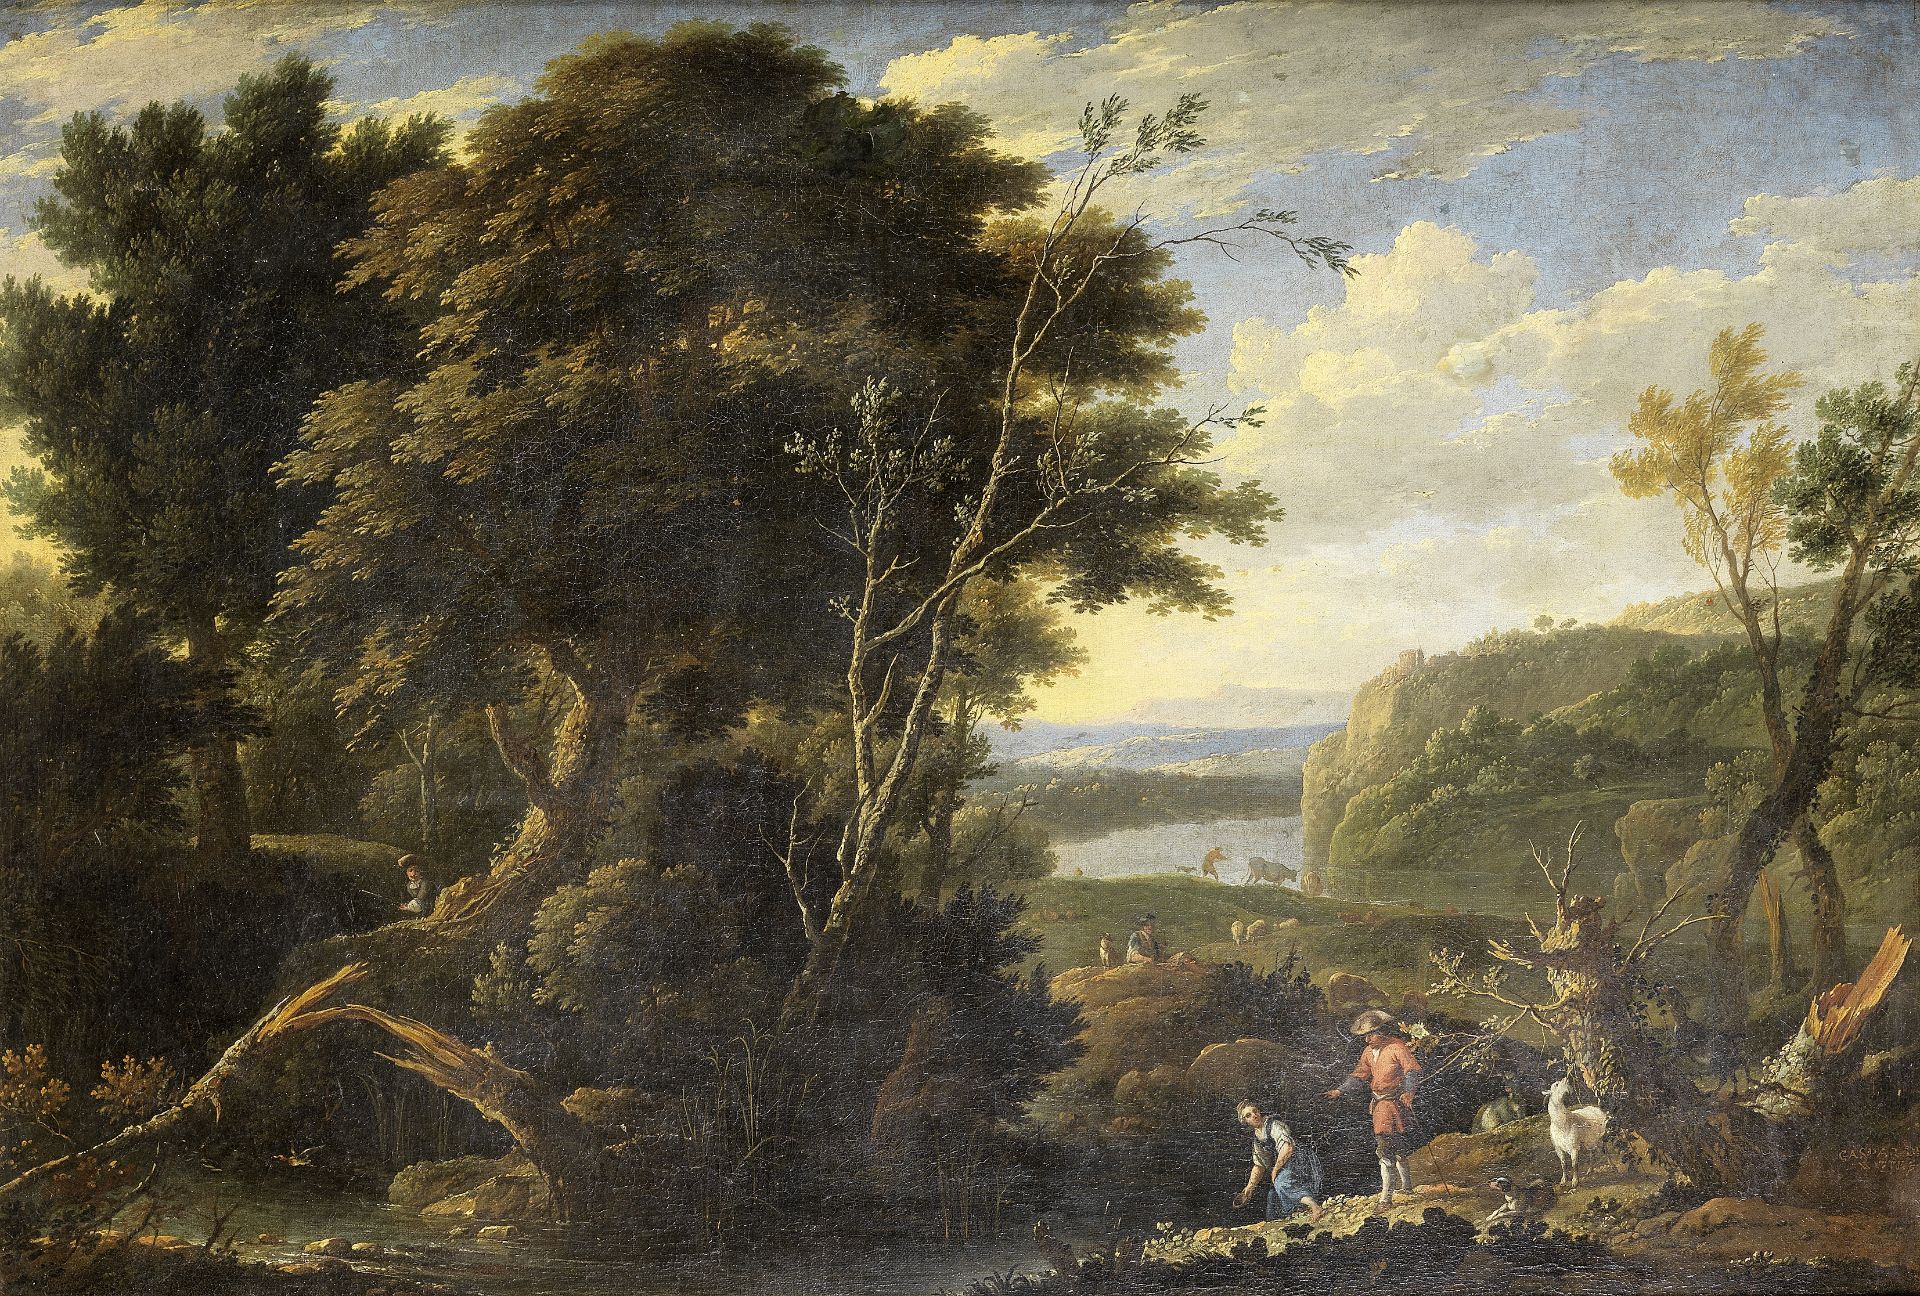 Gaspar de Witte (Antwerp 1624-1681) An Italianate landscape with drovers by a river